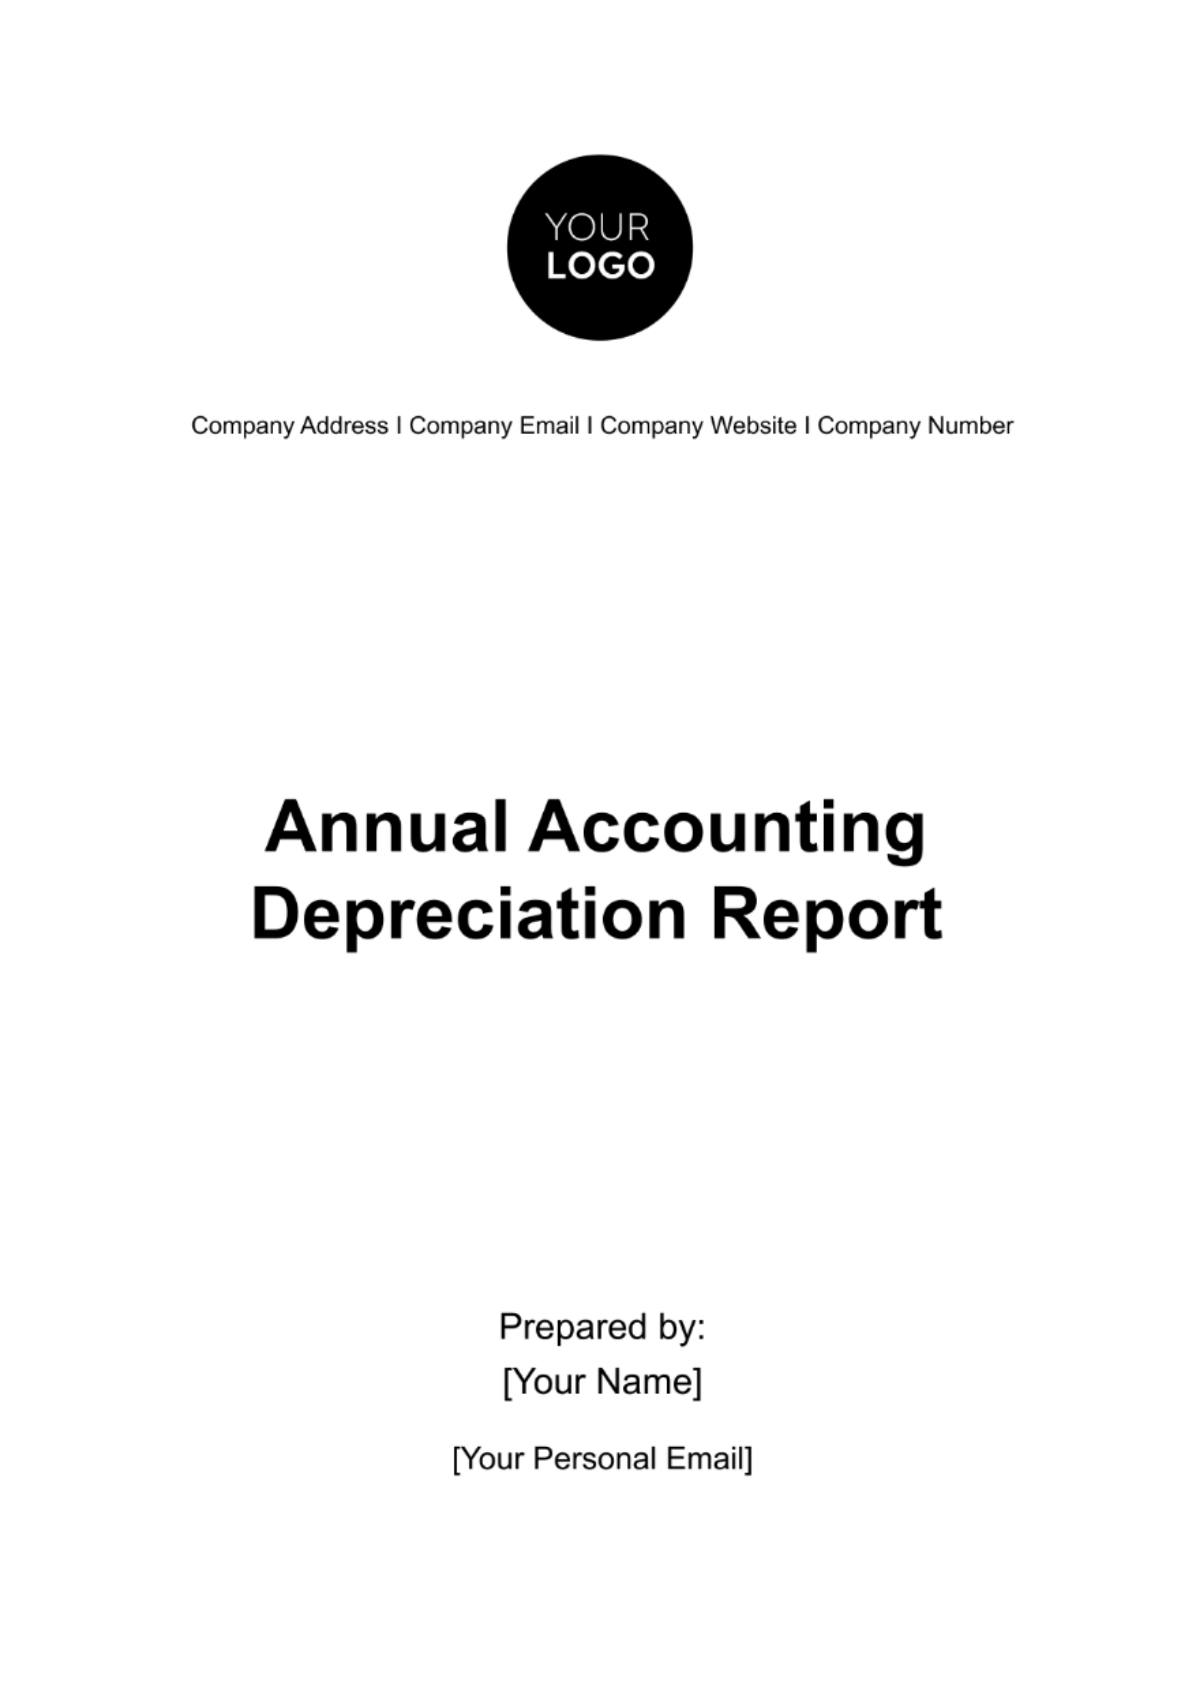 Annual Accounting Depreciation Report Template